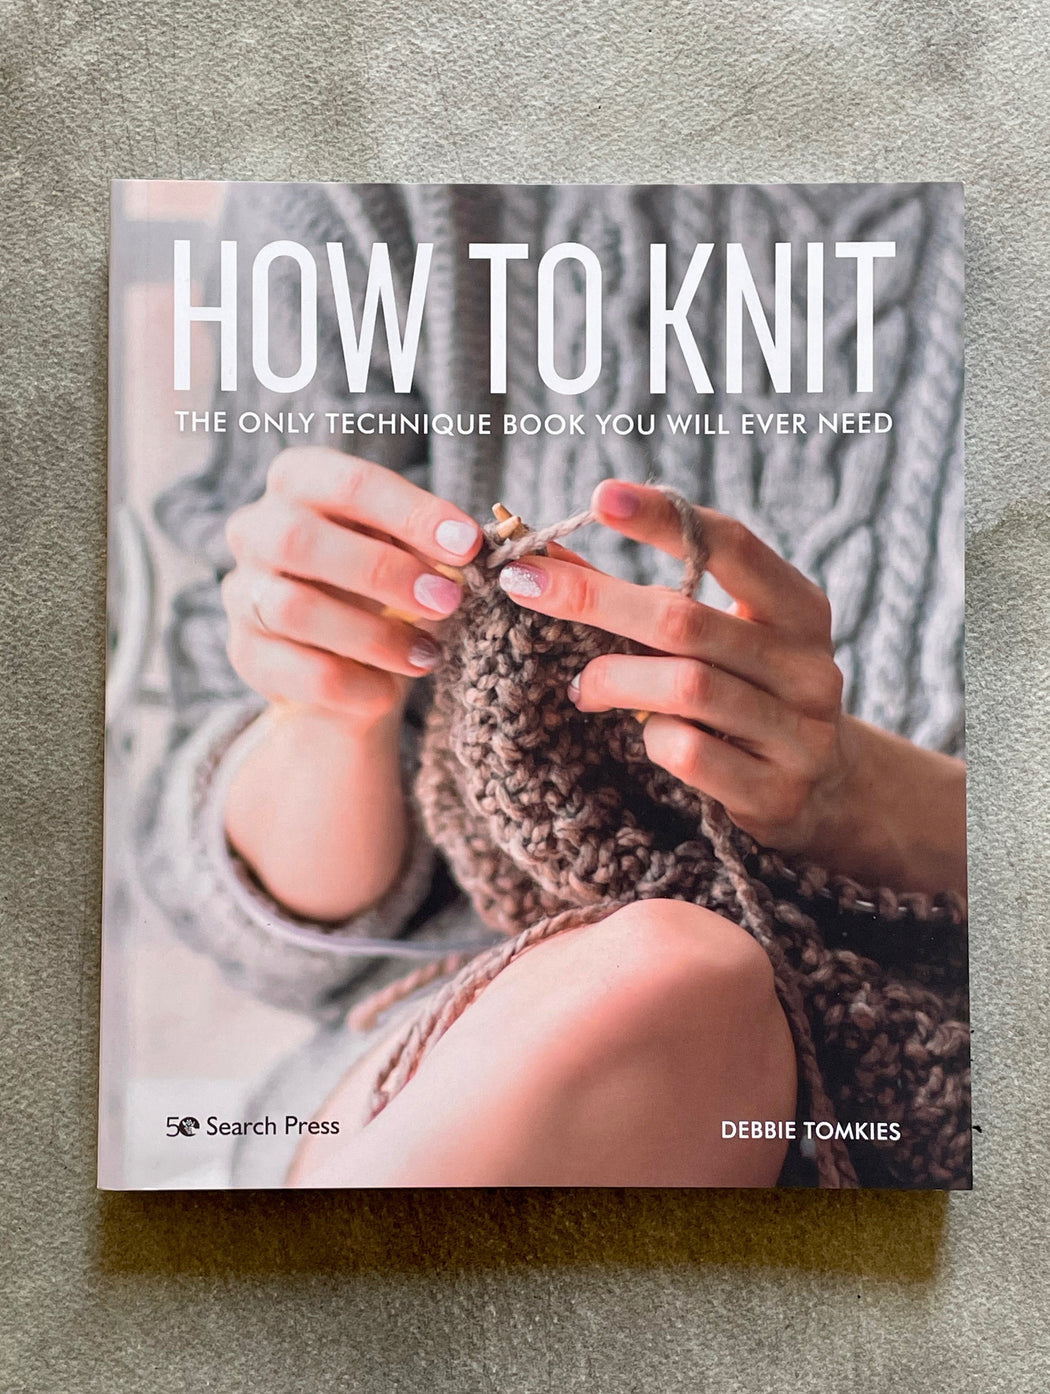 "How to Knit" by Debbie Tomkies